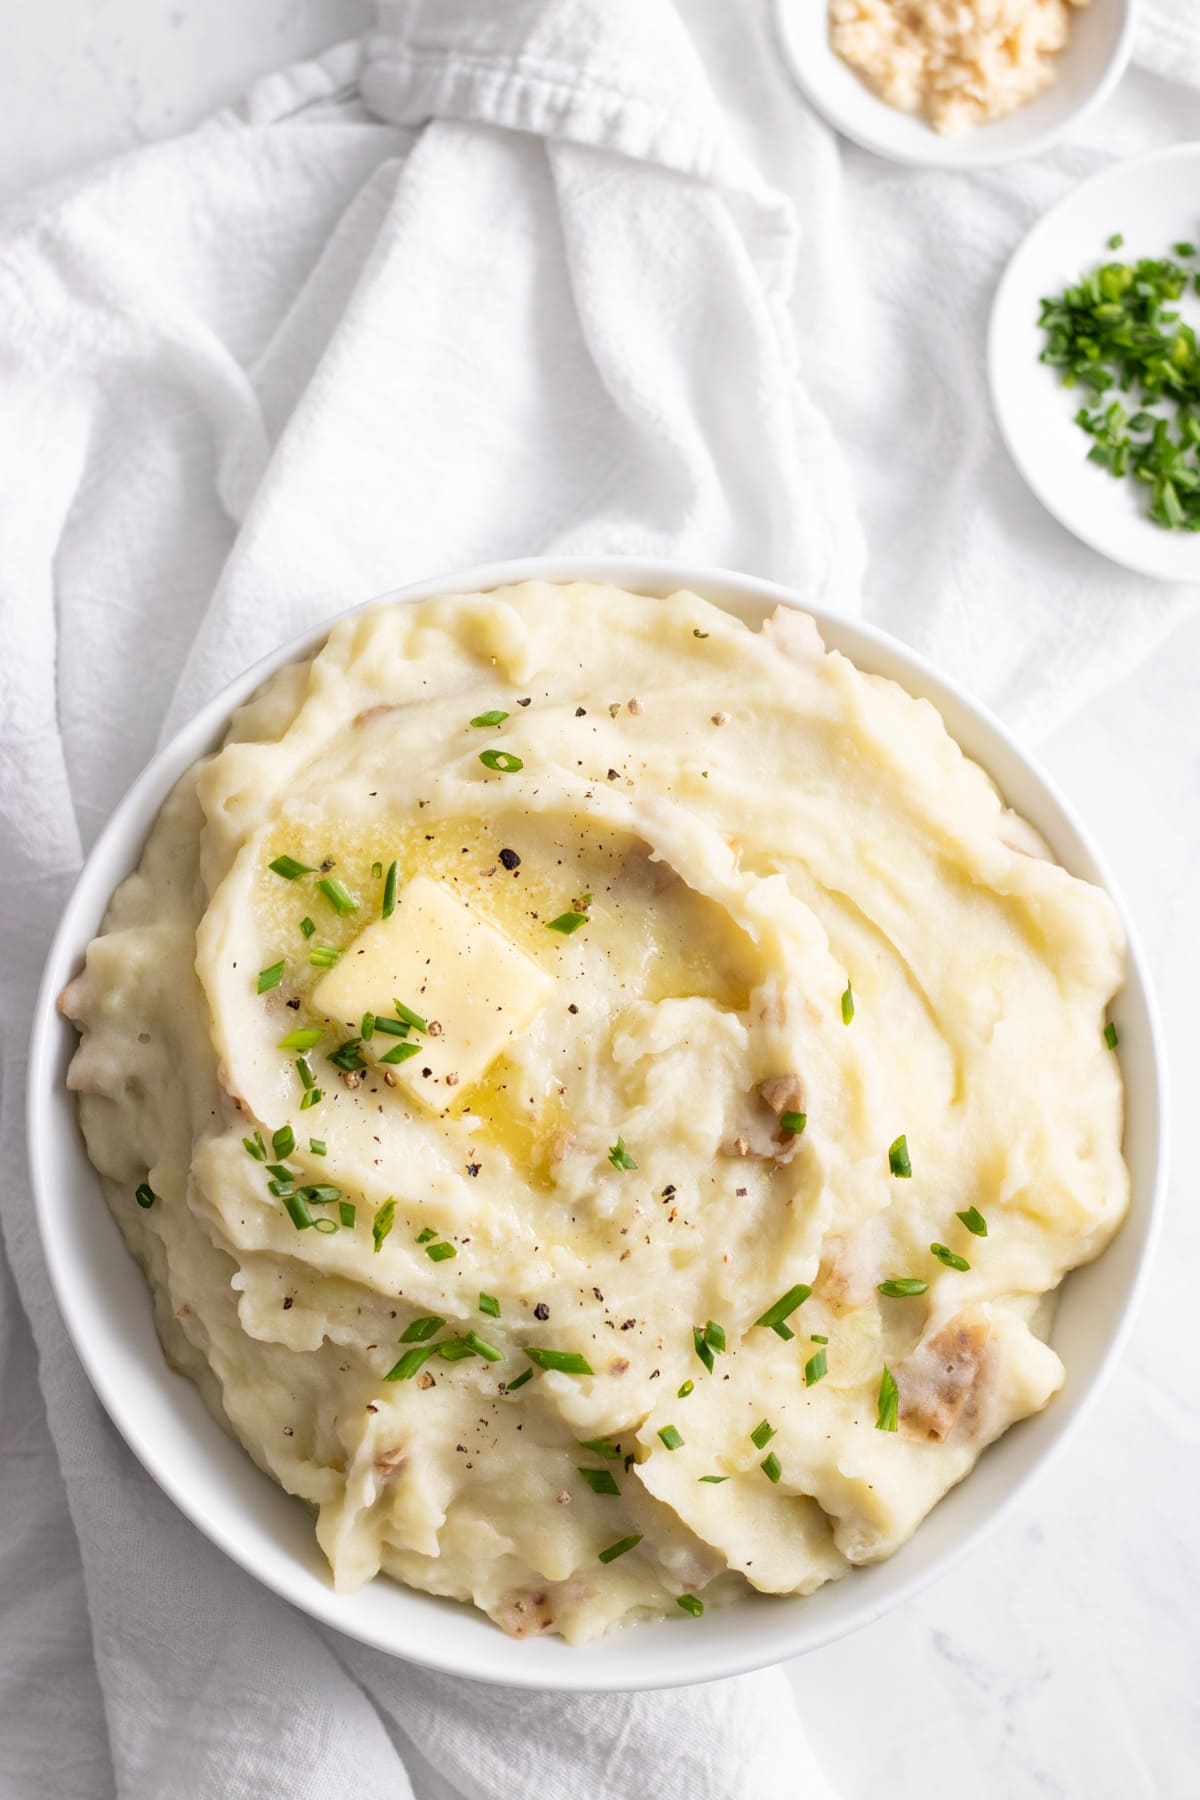 Looking down at a bowl of mashed potatoes topped with snipped fresh chives, a dab of melting butter, and freshly-cracked black pepper. The bowl sits on a white linen napkin and is surrounded by small bowls of snipped chives and grated horseradish.